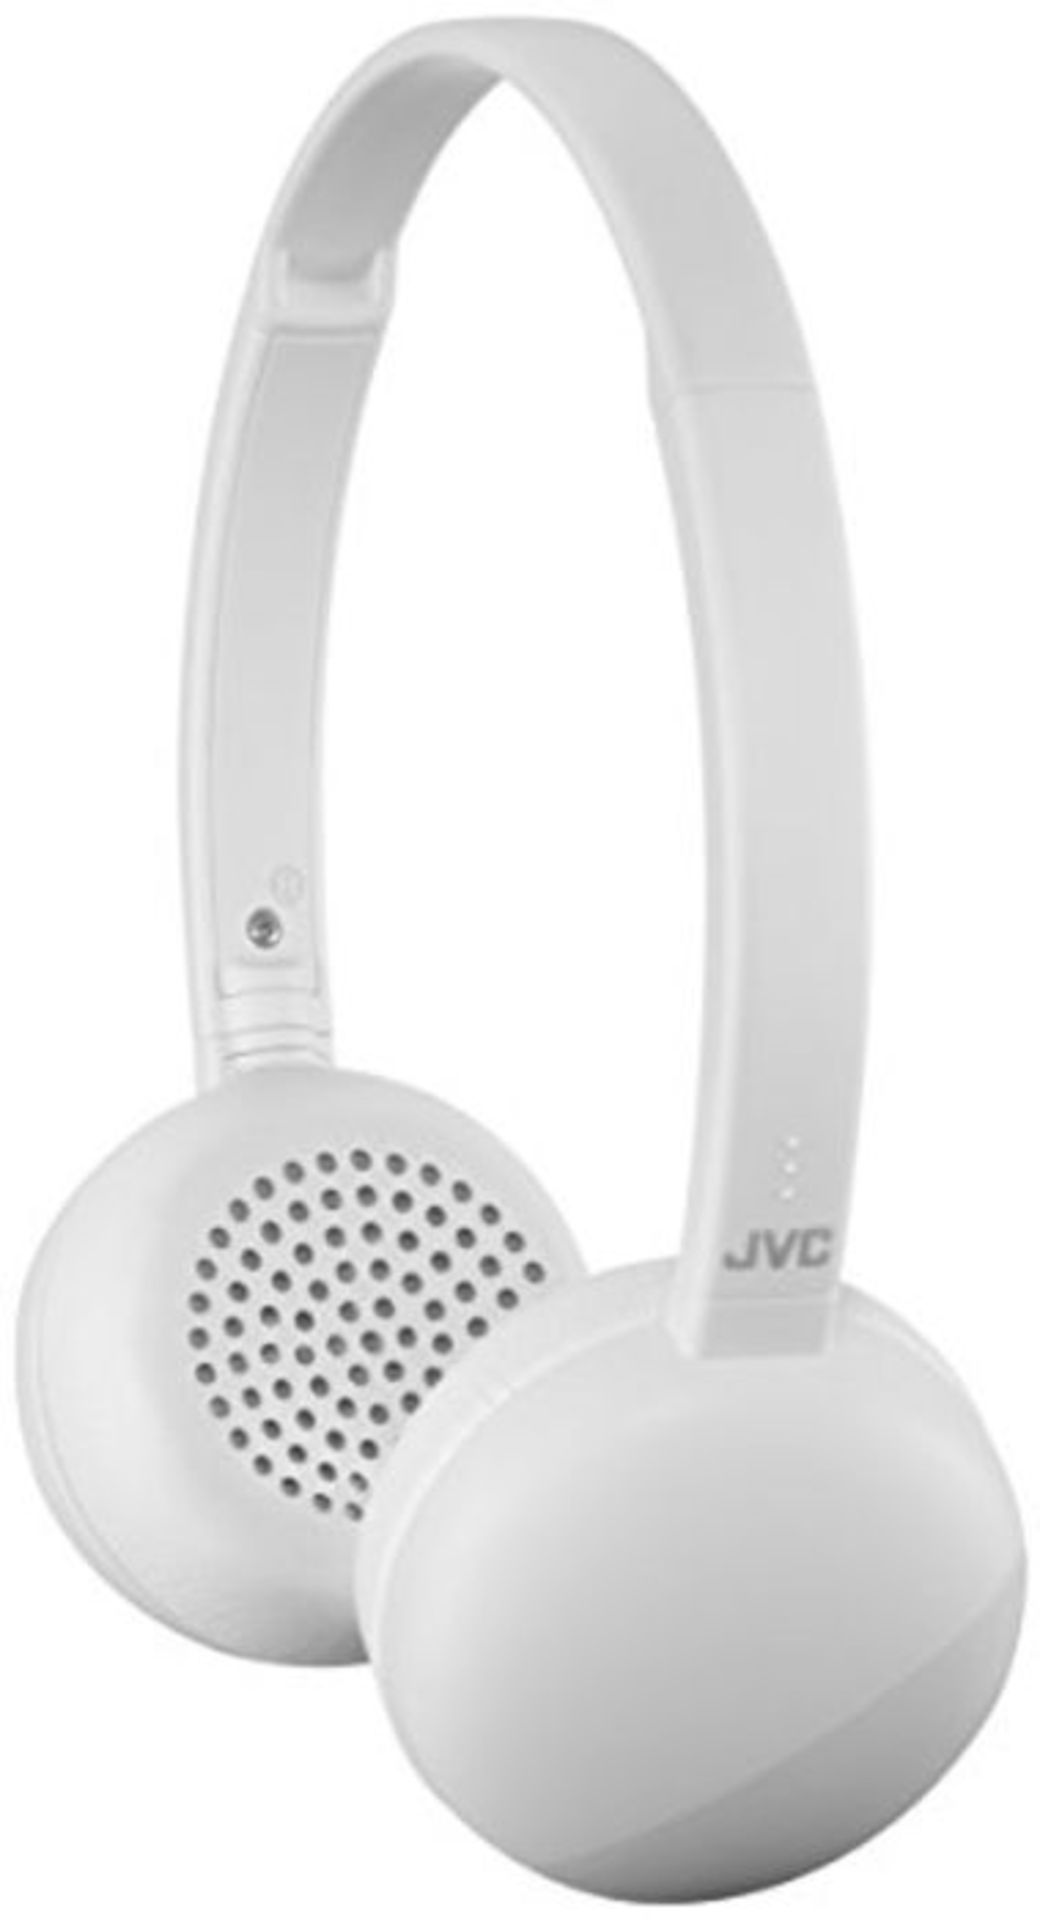 JVC S20BT Wireless Bluetooth On Ear Headphones Foldable with Built-In Remote and Mic f